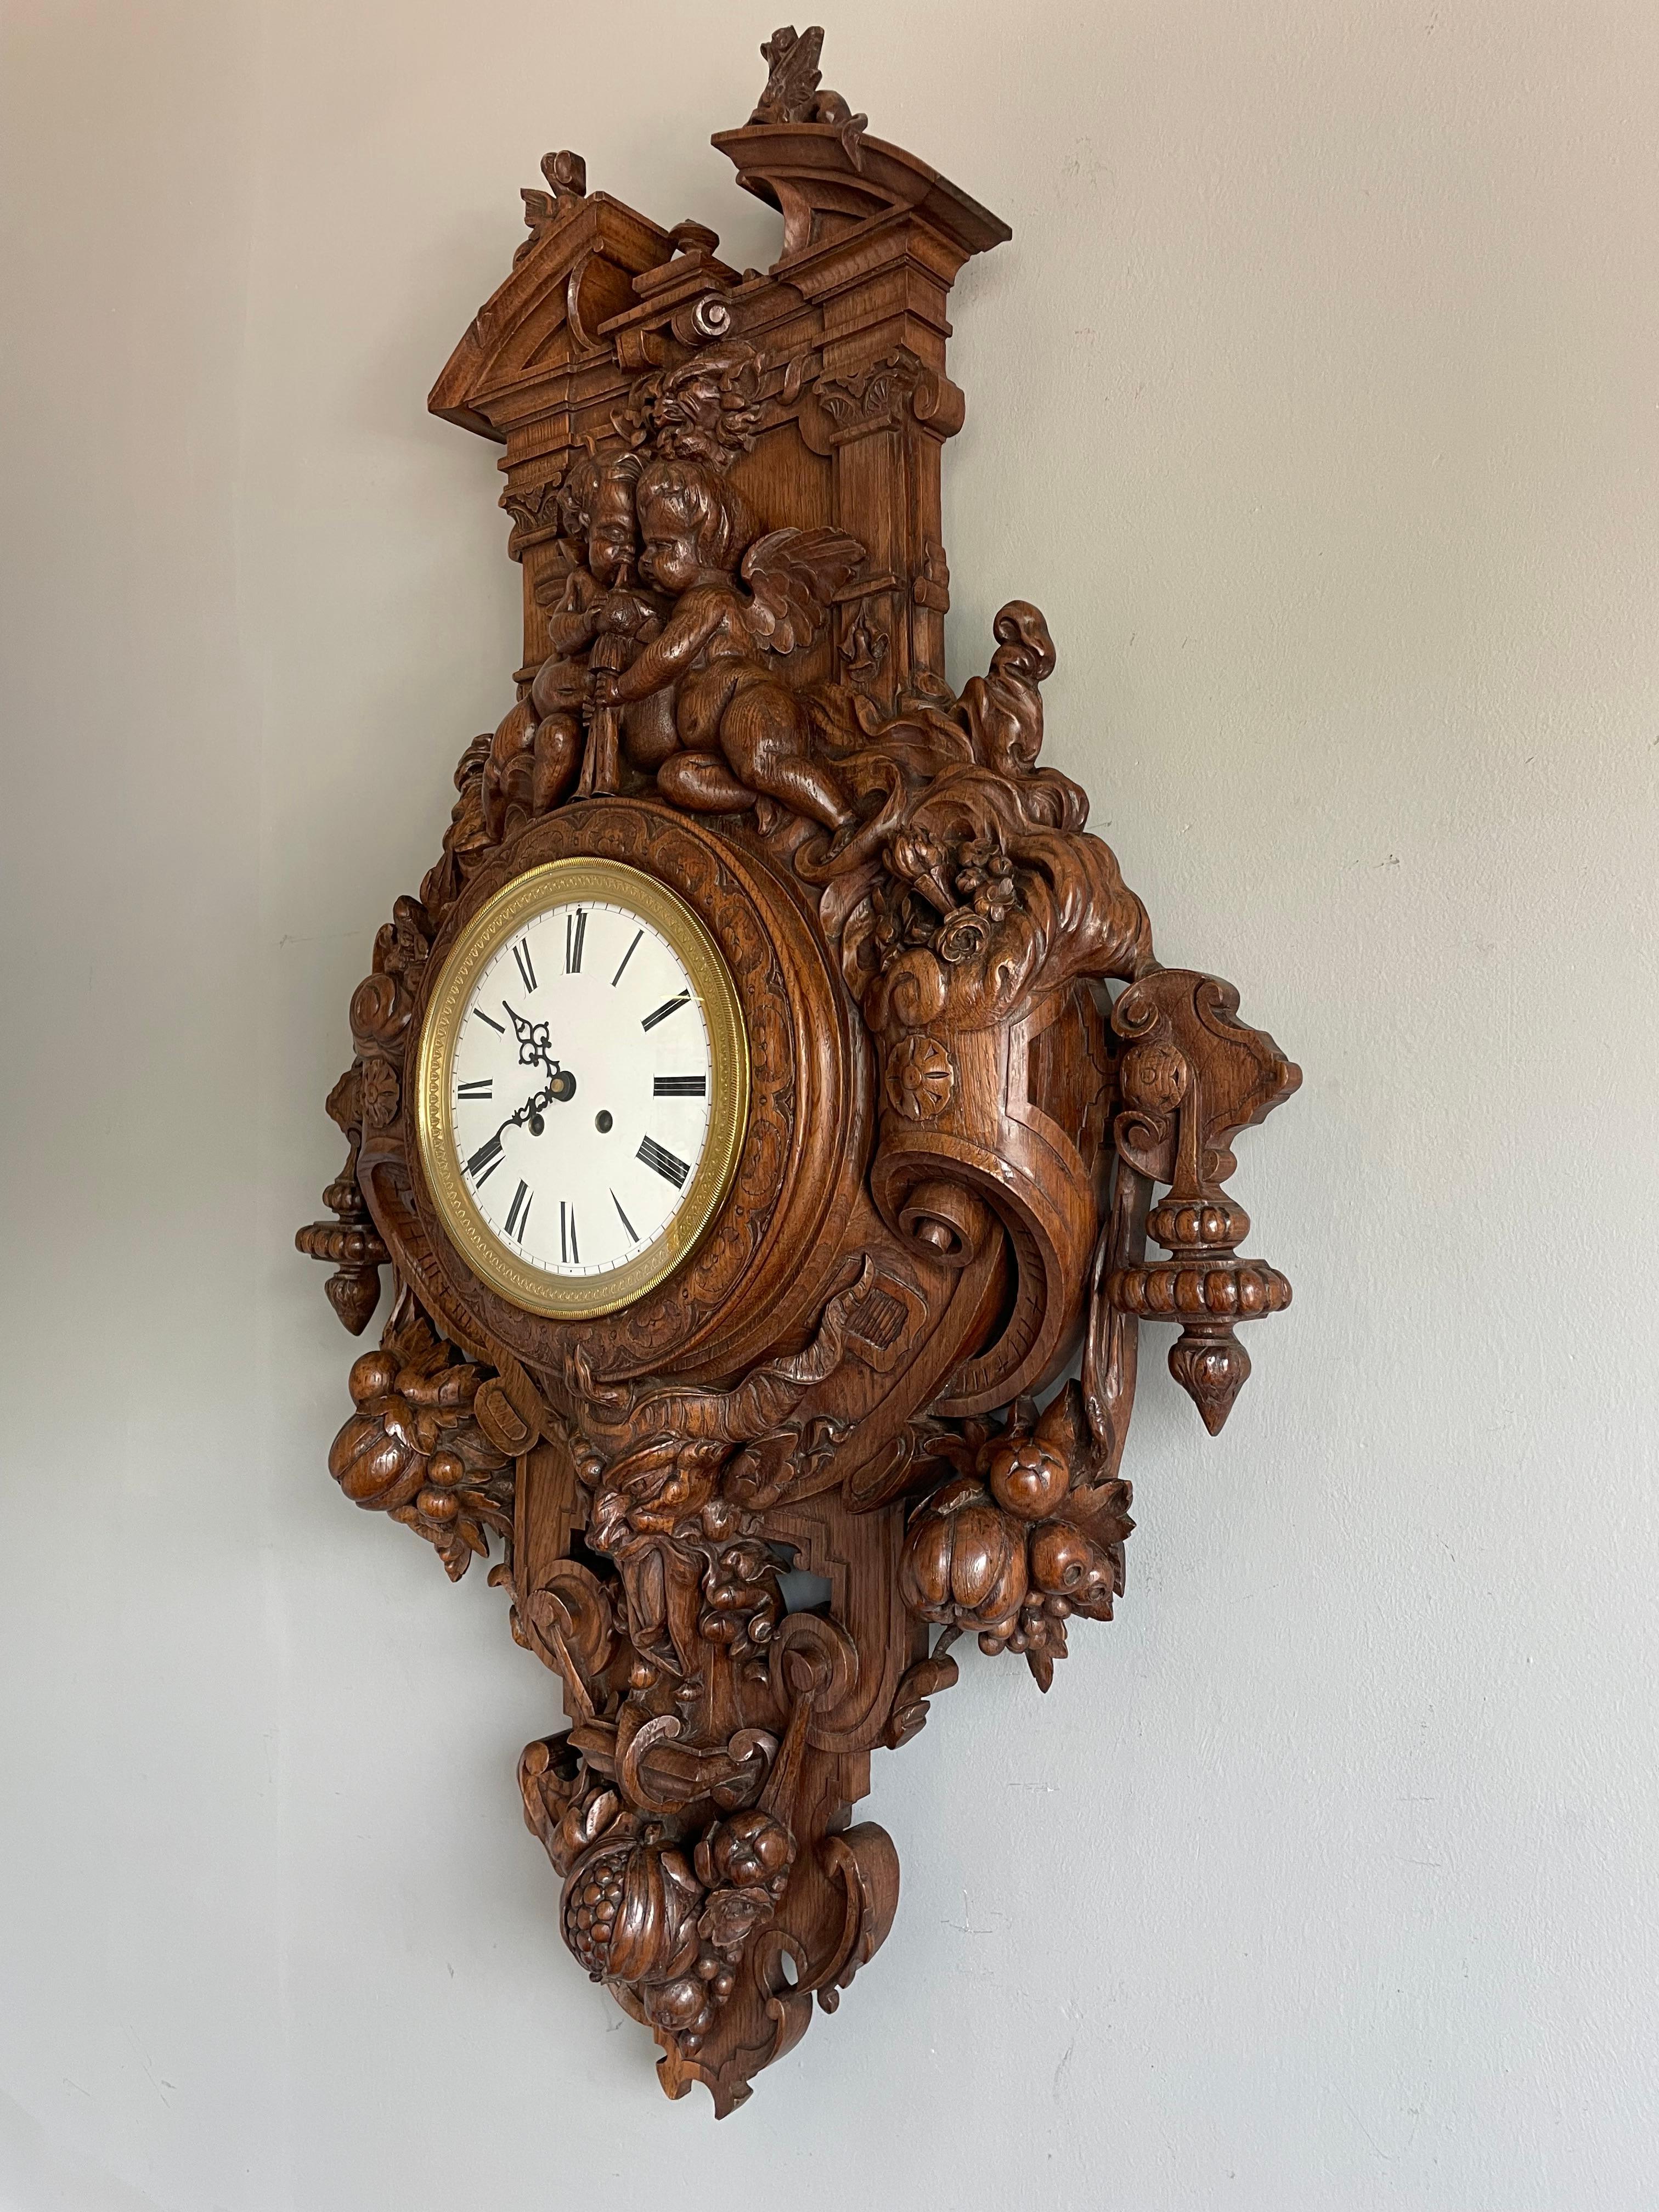 Antique & Huge Hand Carved Wall Clock by Parisian Top Makers Guéret Frères 1860s For Sale 11